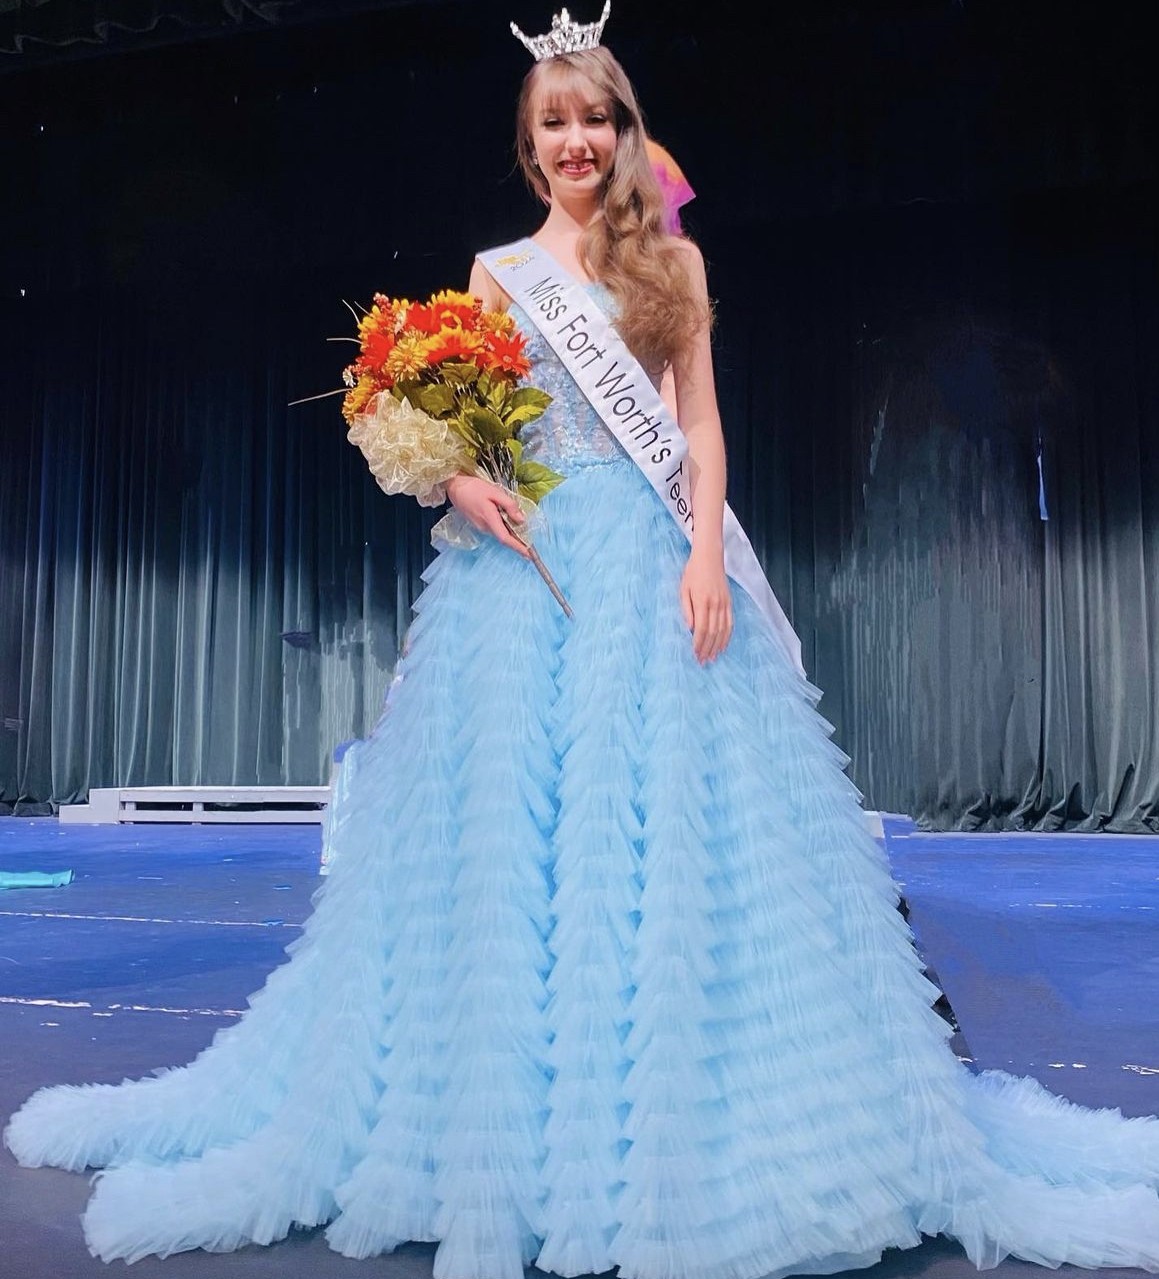 Taylor recently was crowned Miss Fort Worth Teen